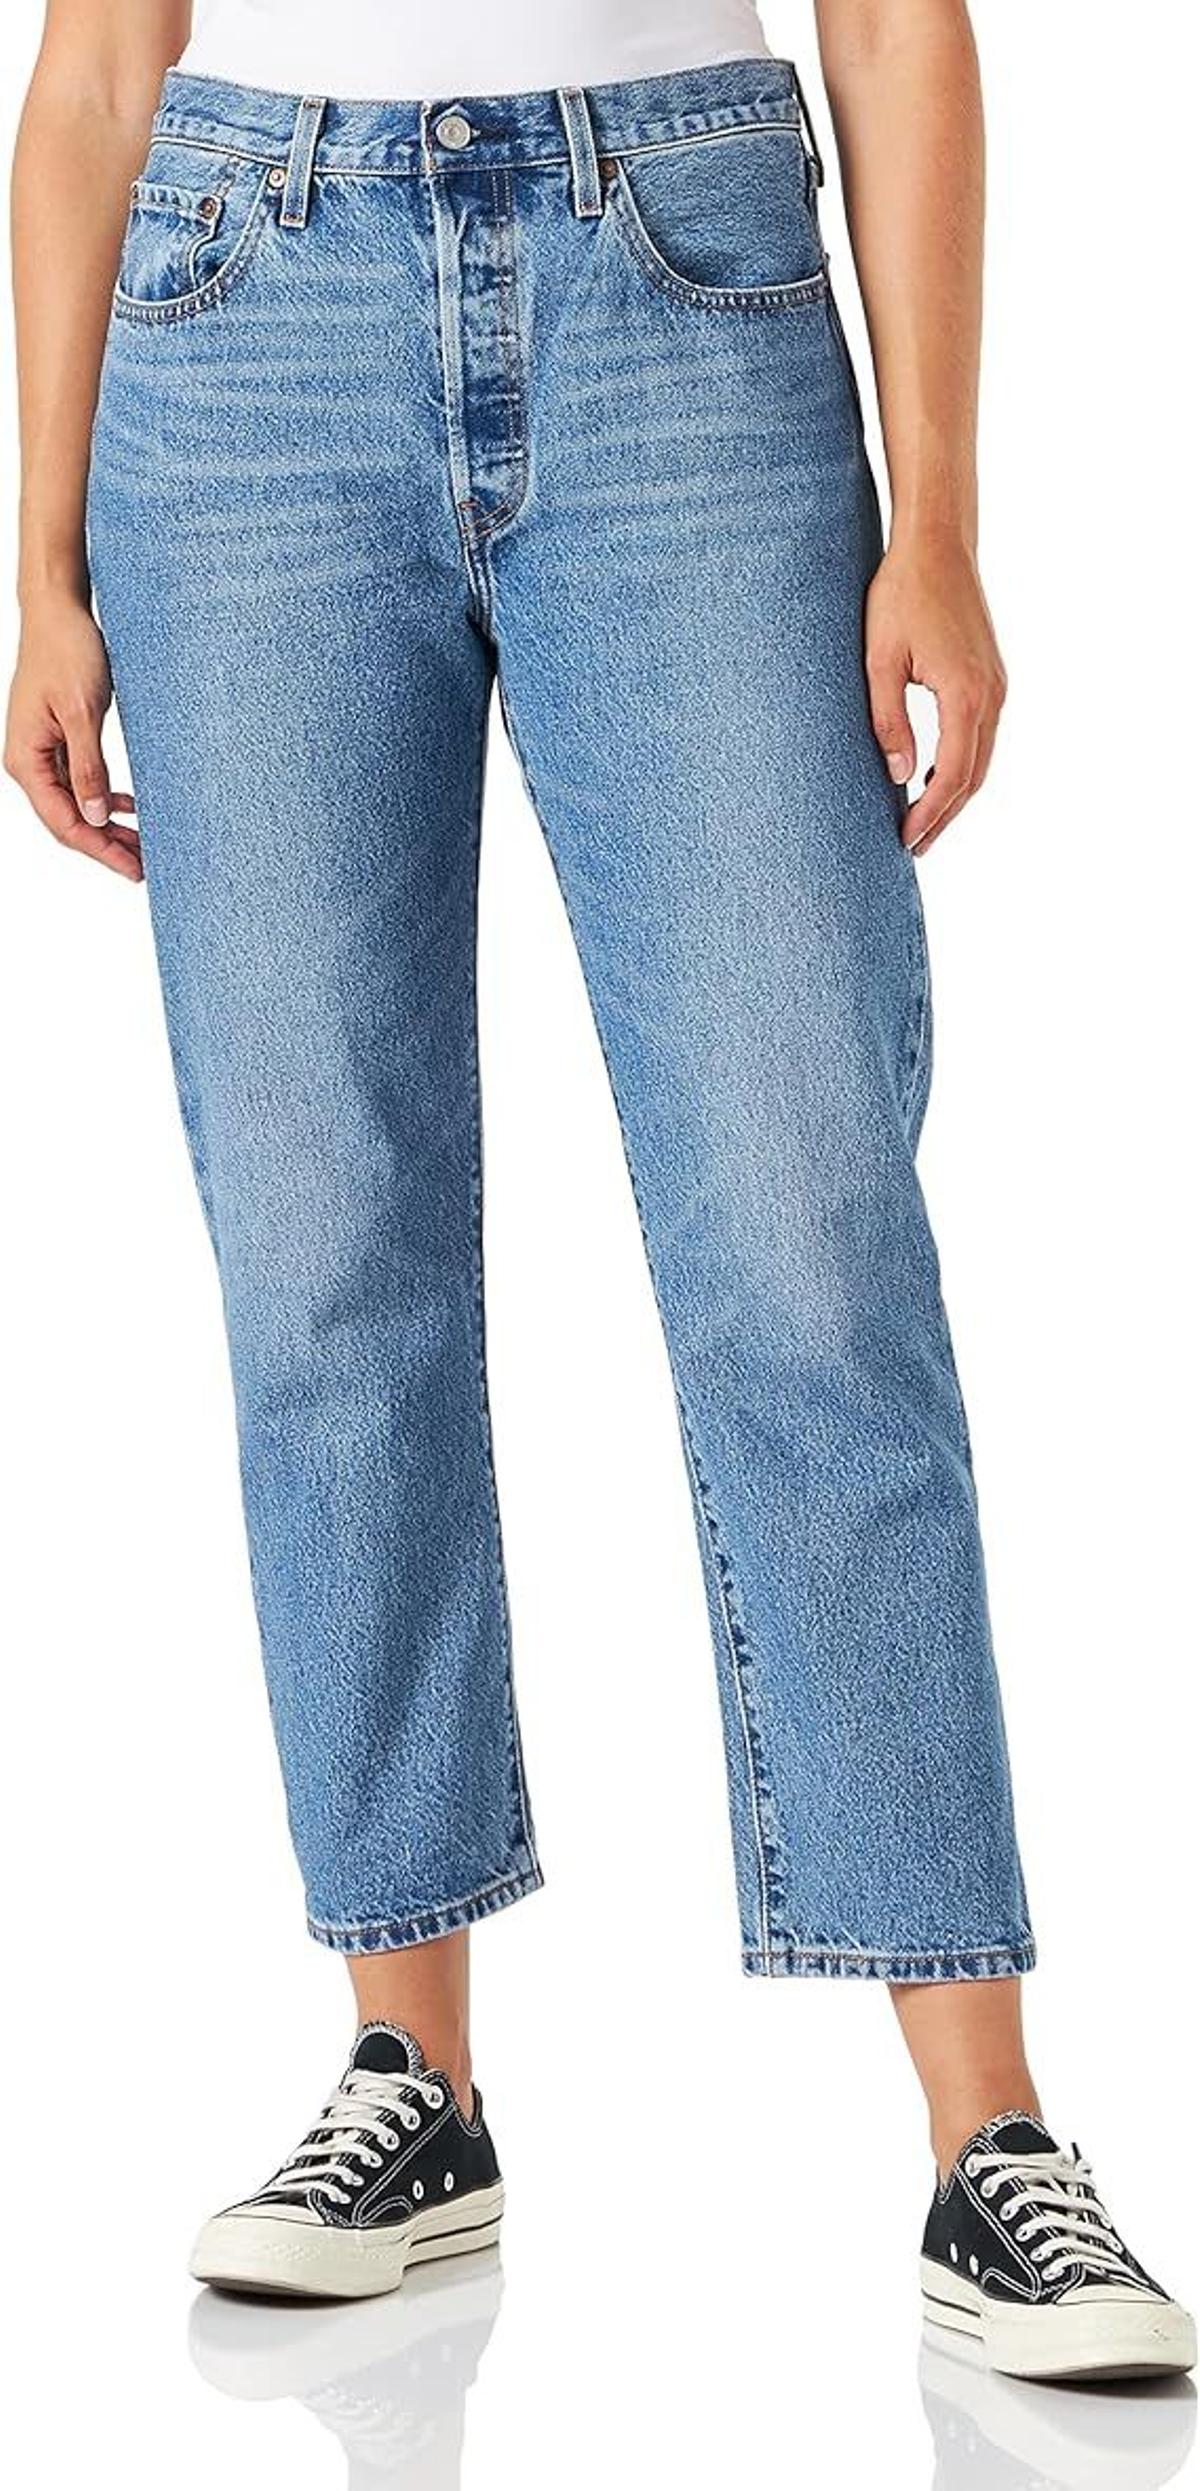 Pantalones Mujer Jeans Clasicos Levis